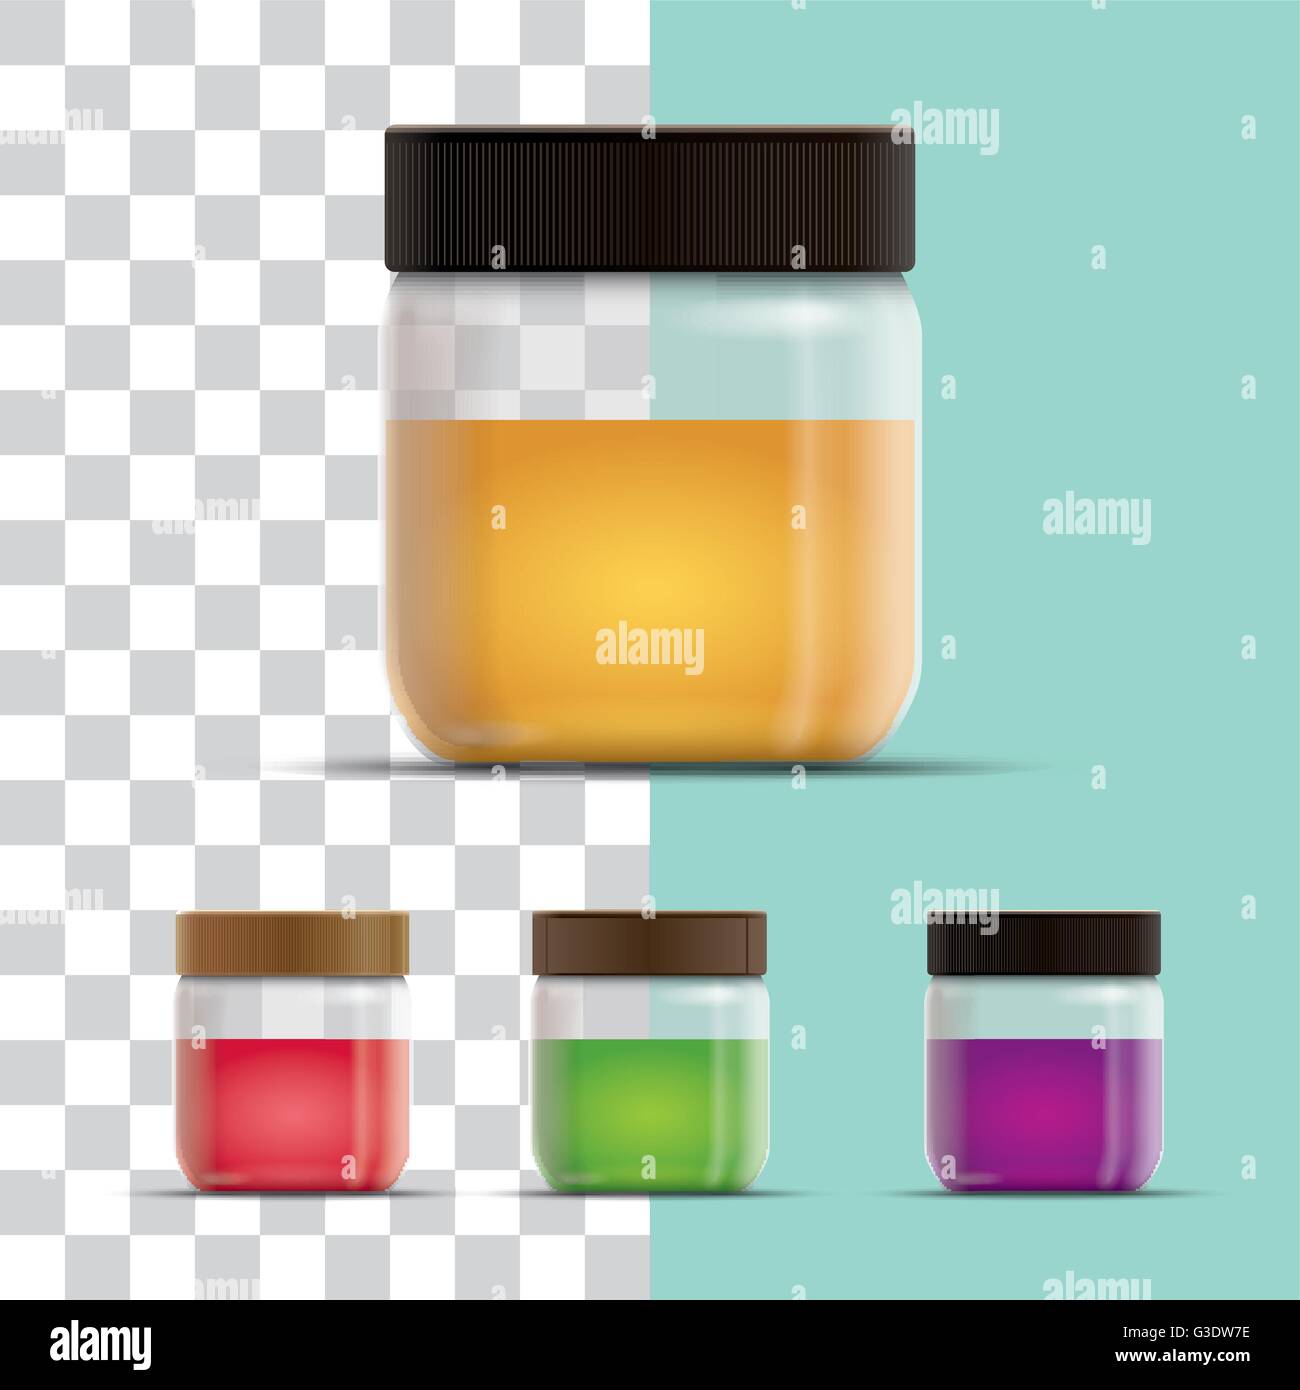 Vector realistic illustration of honey or jam jar collection. All elements are layered separately in vector file. Global colors. Stock Vector